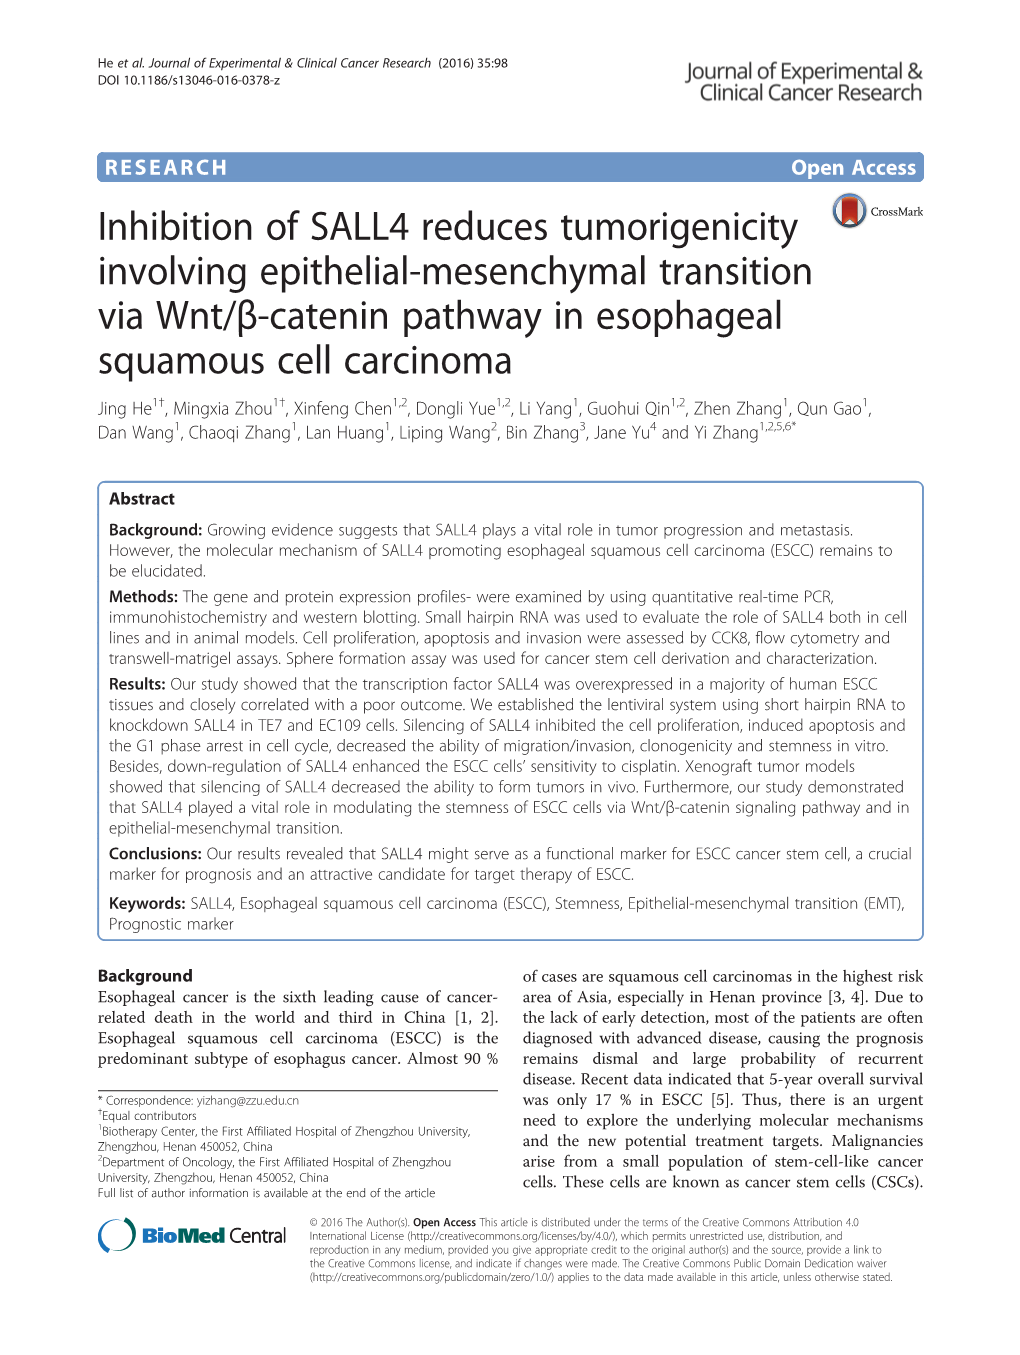 Inhibition of SALL4 Reduces Tumorigenicity Involving Epithelial